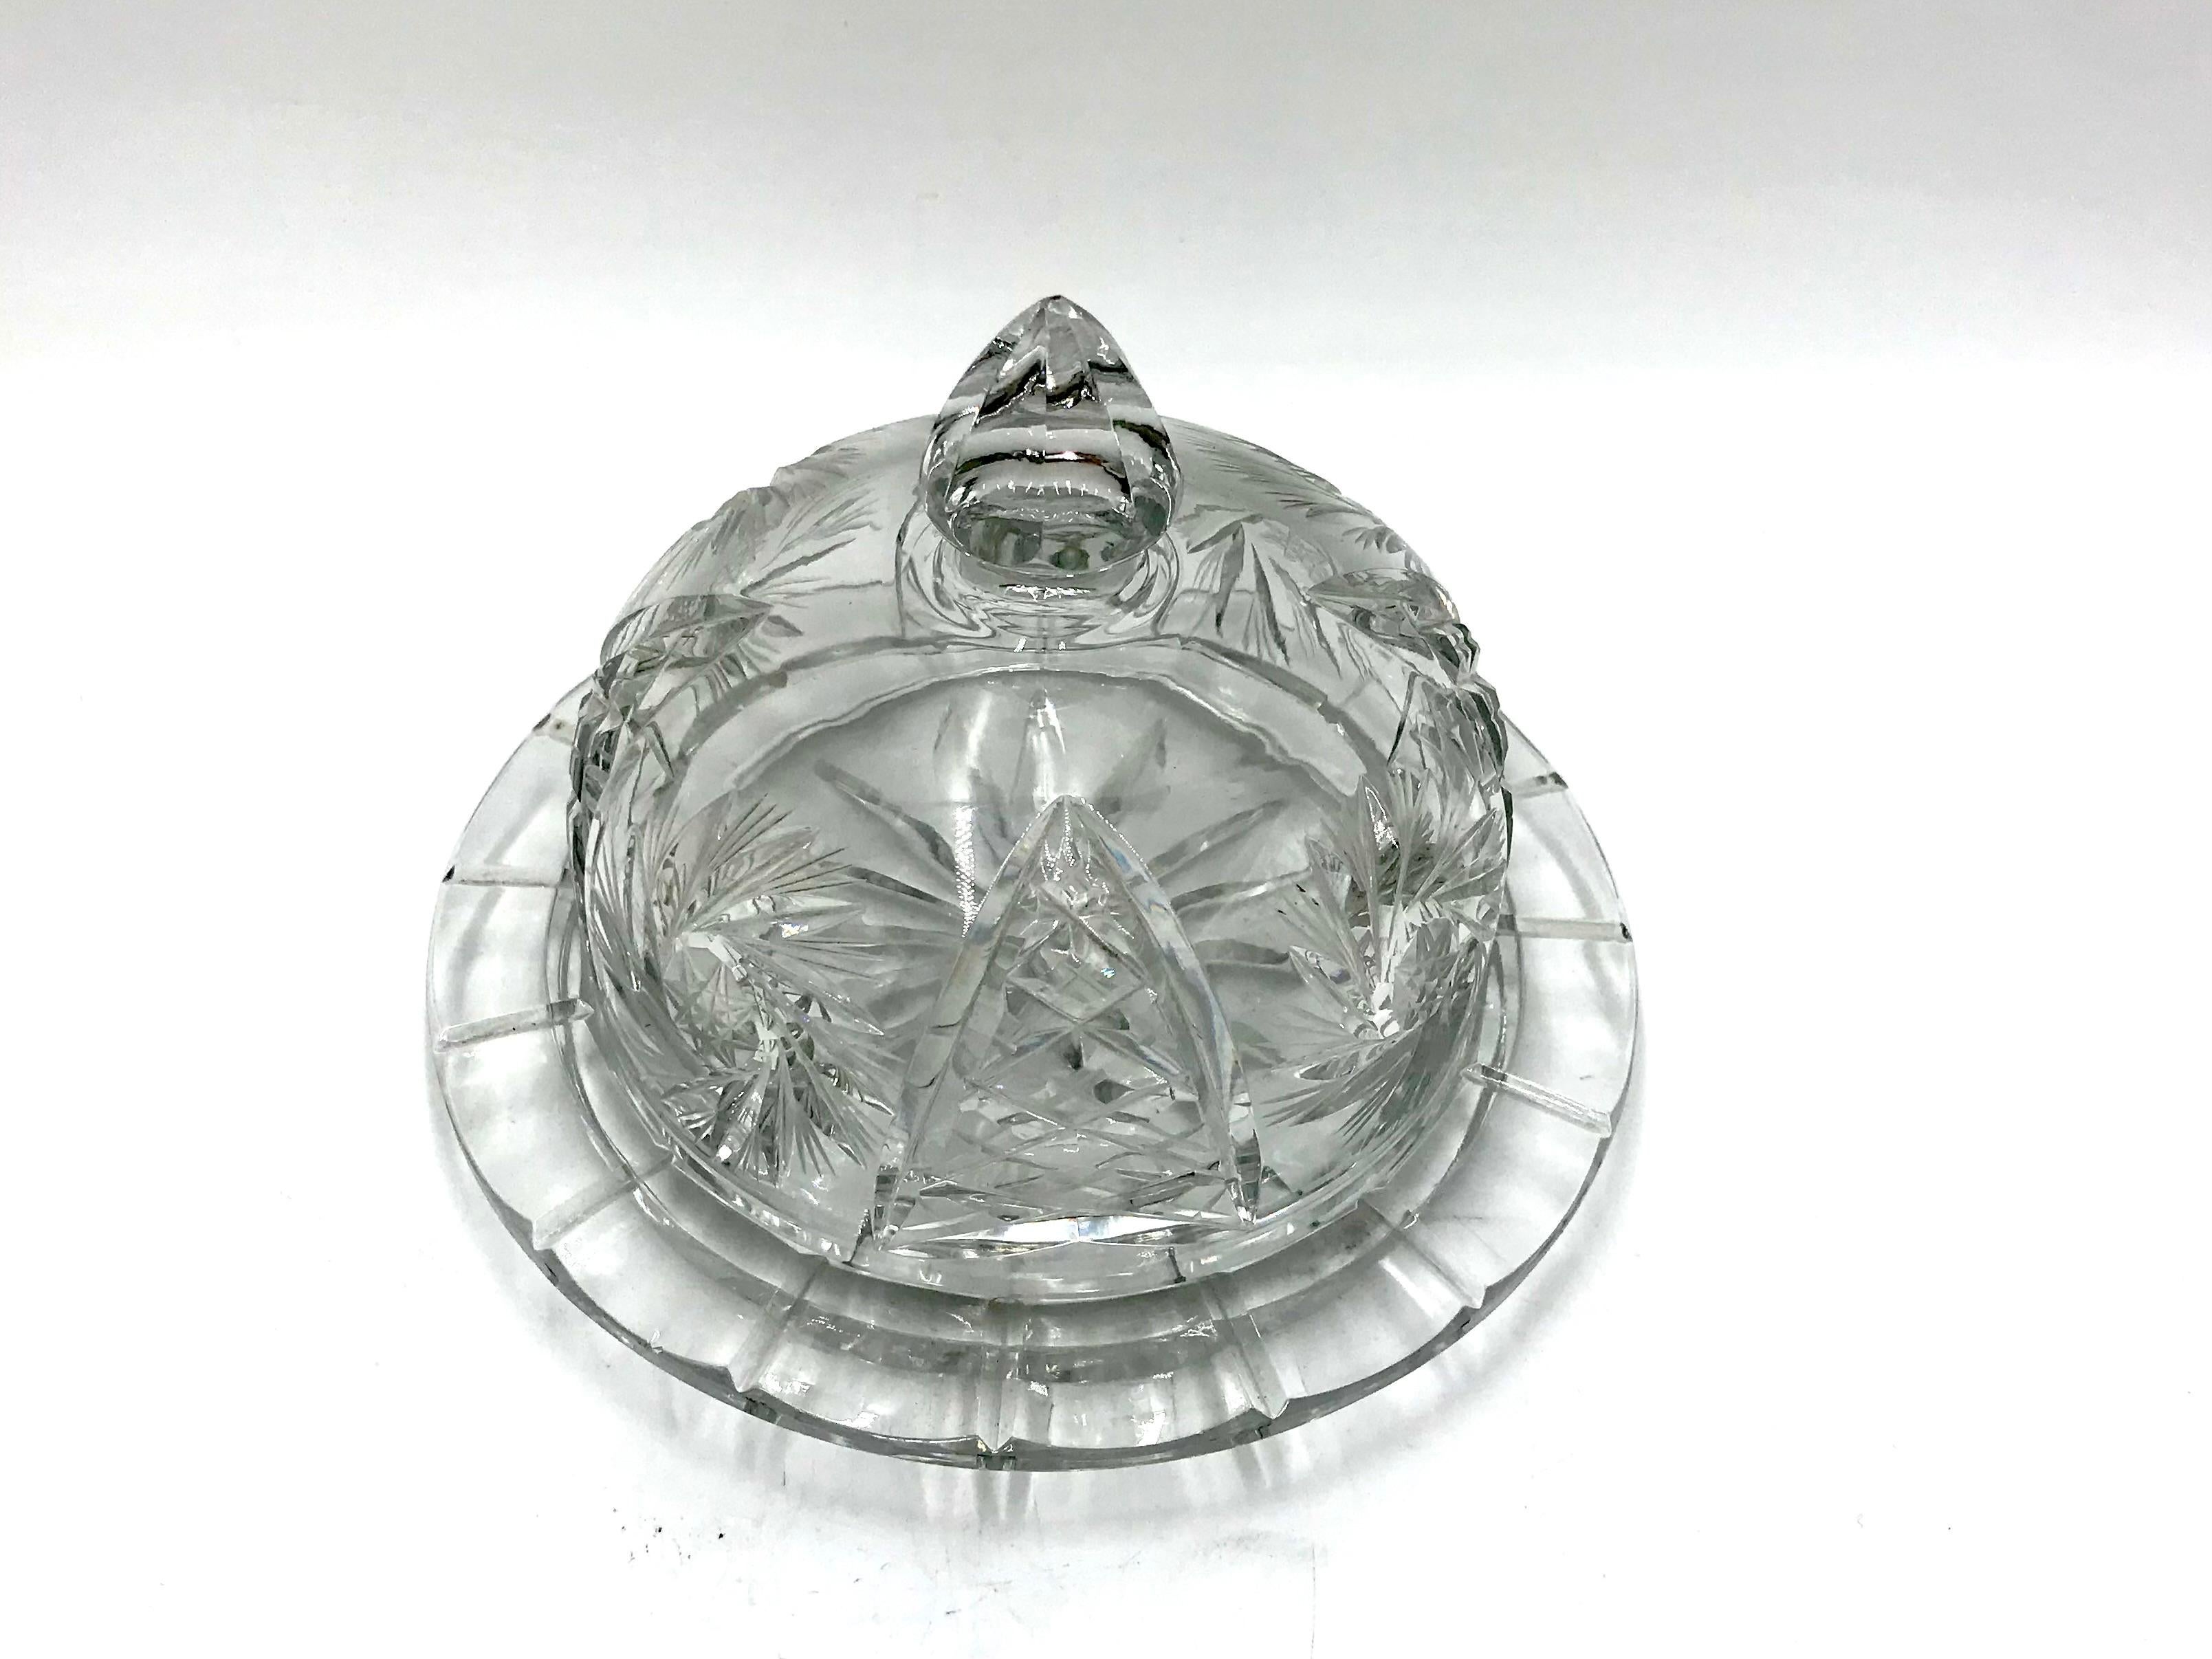 Crystal butter dish, Poland, 1960s
Very good condition.